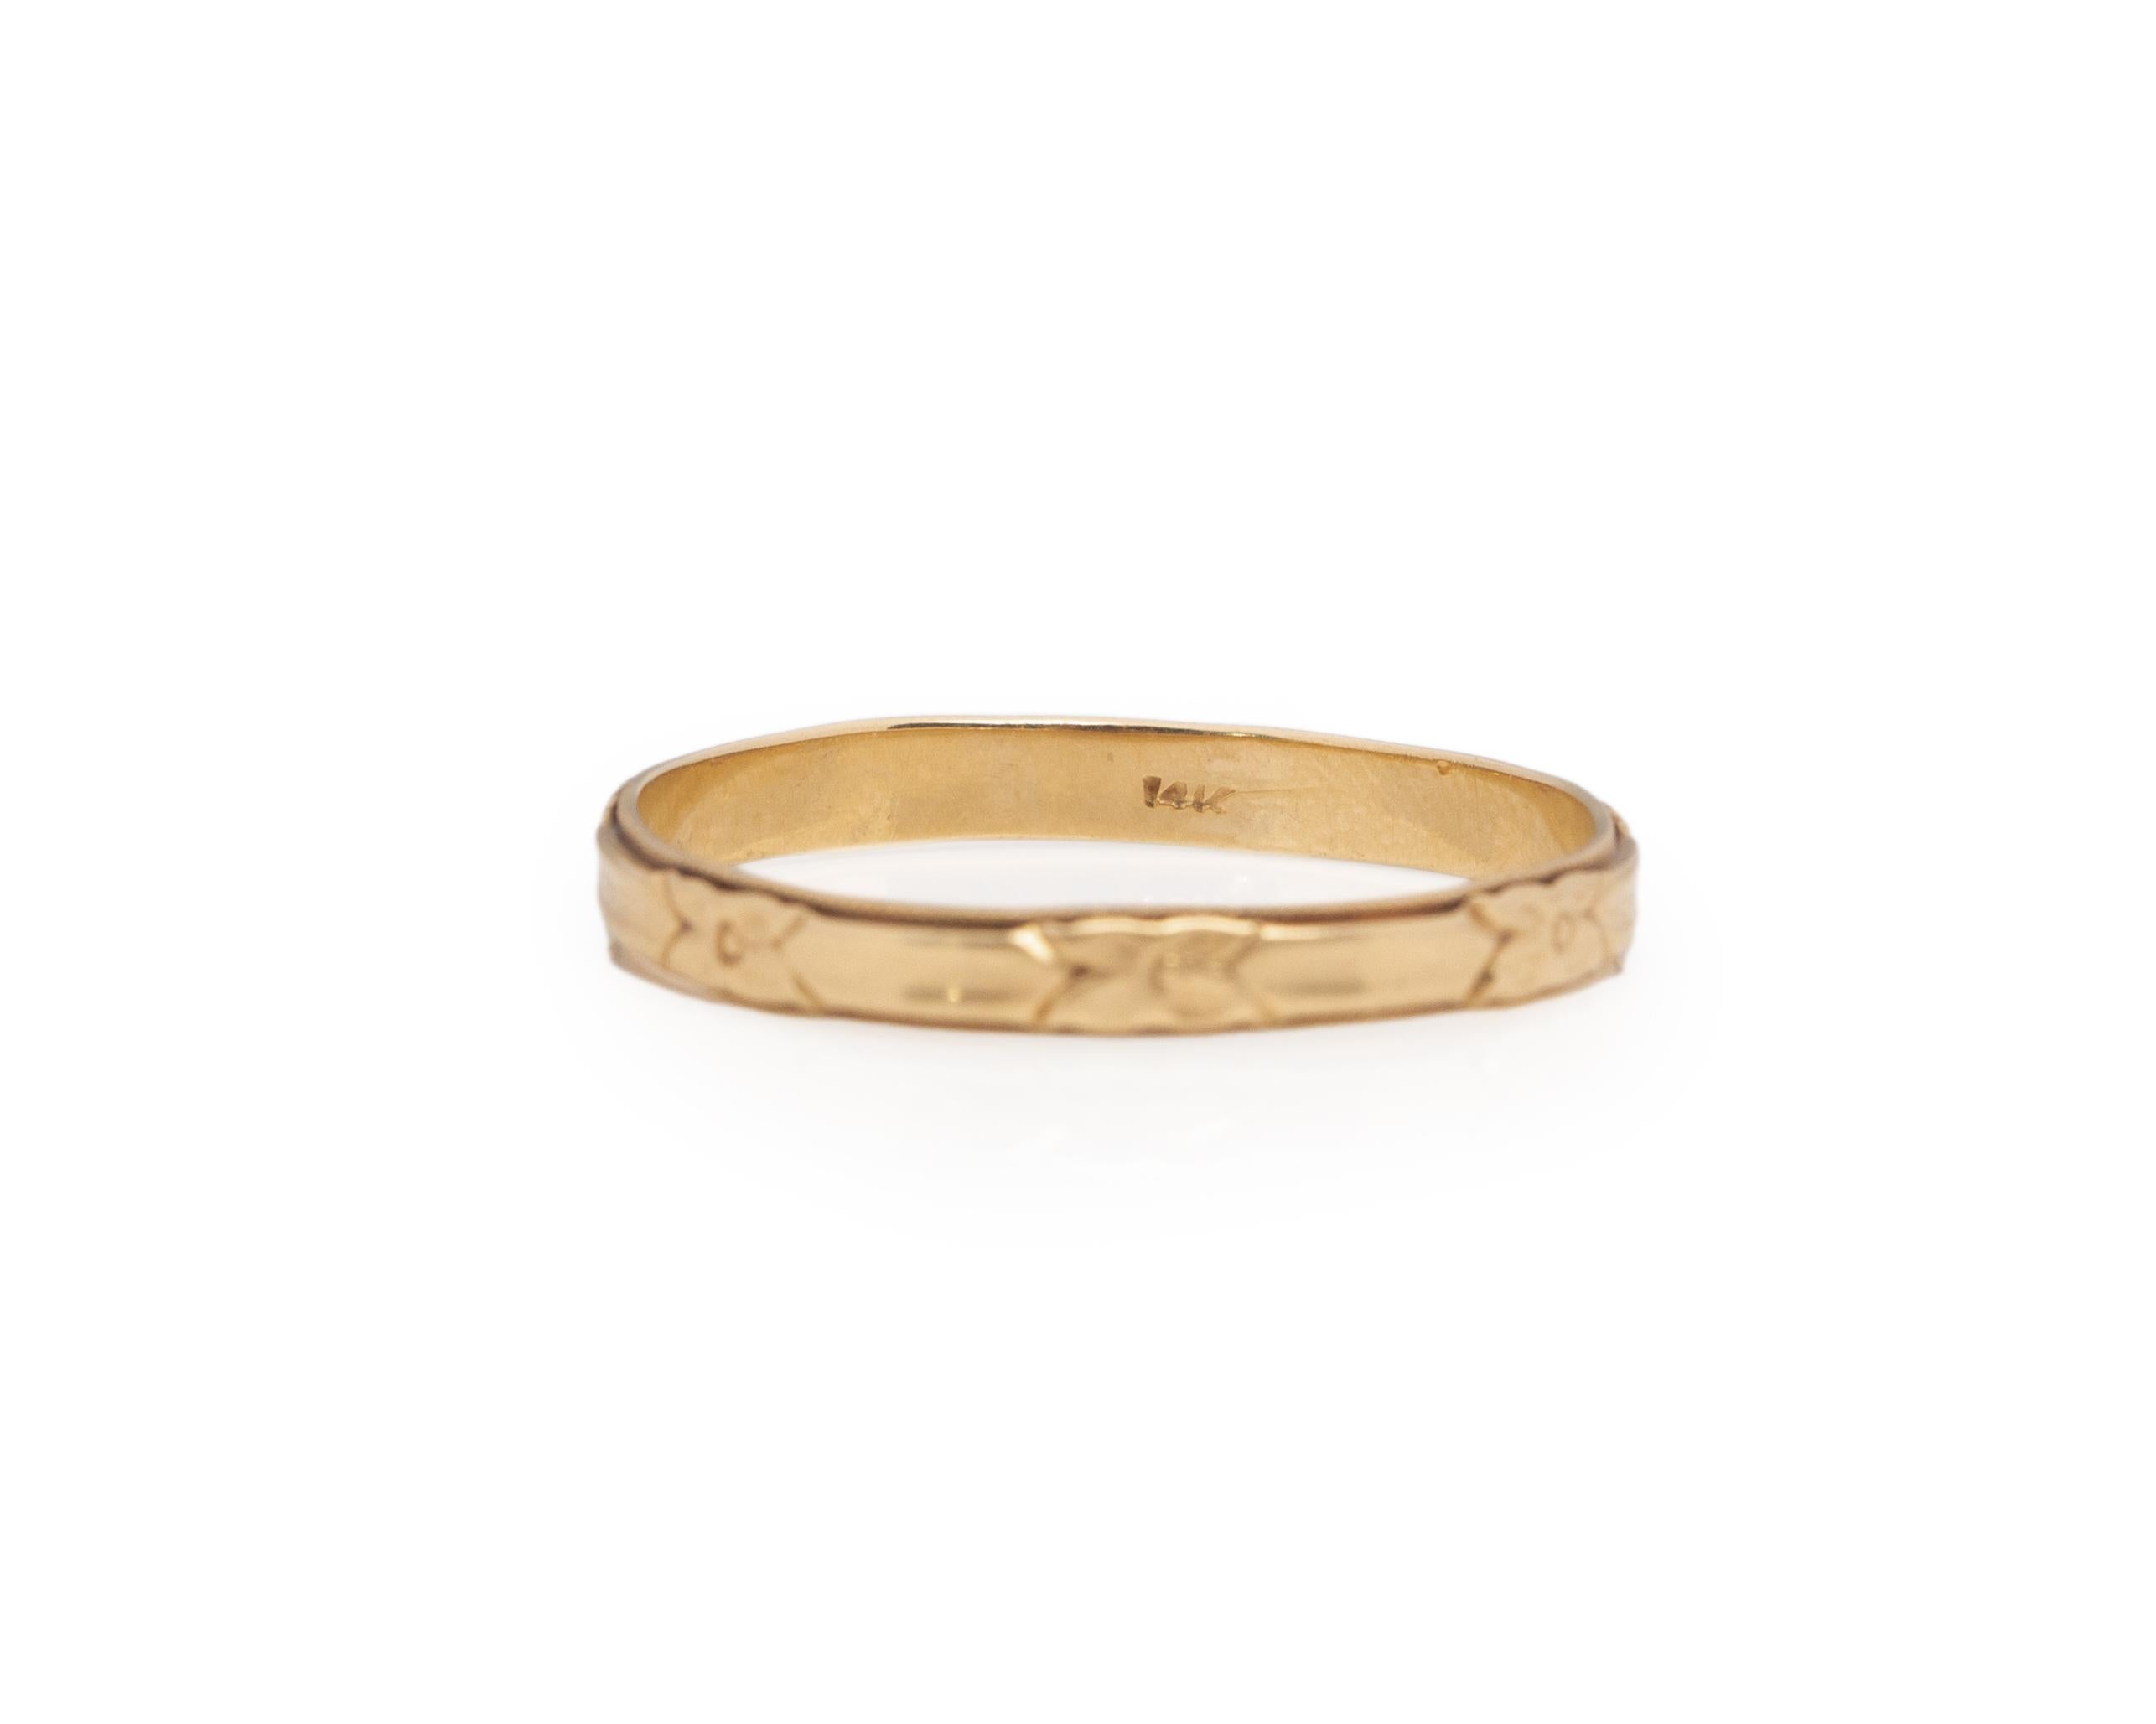 Ring Size:  11.5
Metal Type: 14K Yellow Gold  [Hallmarked, and Tested]
Weight:  2.0grams

Finger to Top of Stone Measurement: 1.0mm
Shank/Band Width: 3.0mm
Condition:  Excellent